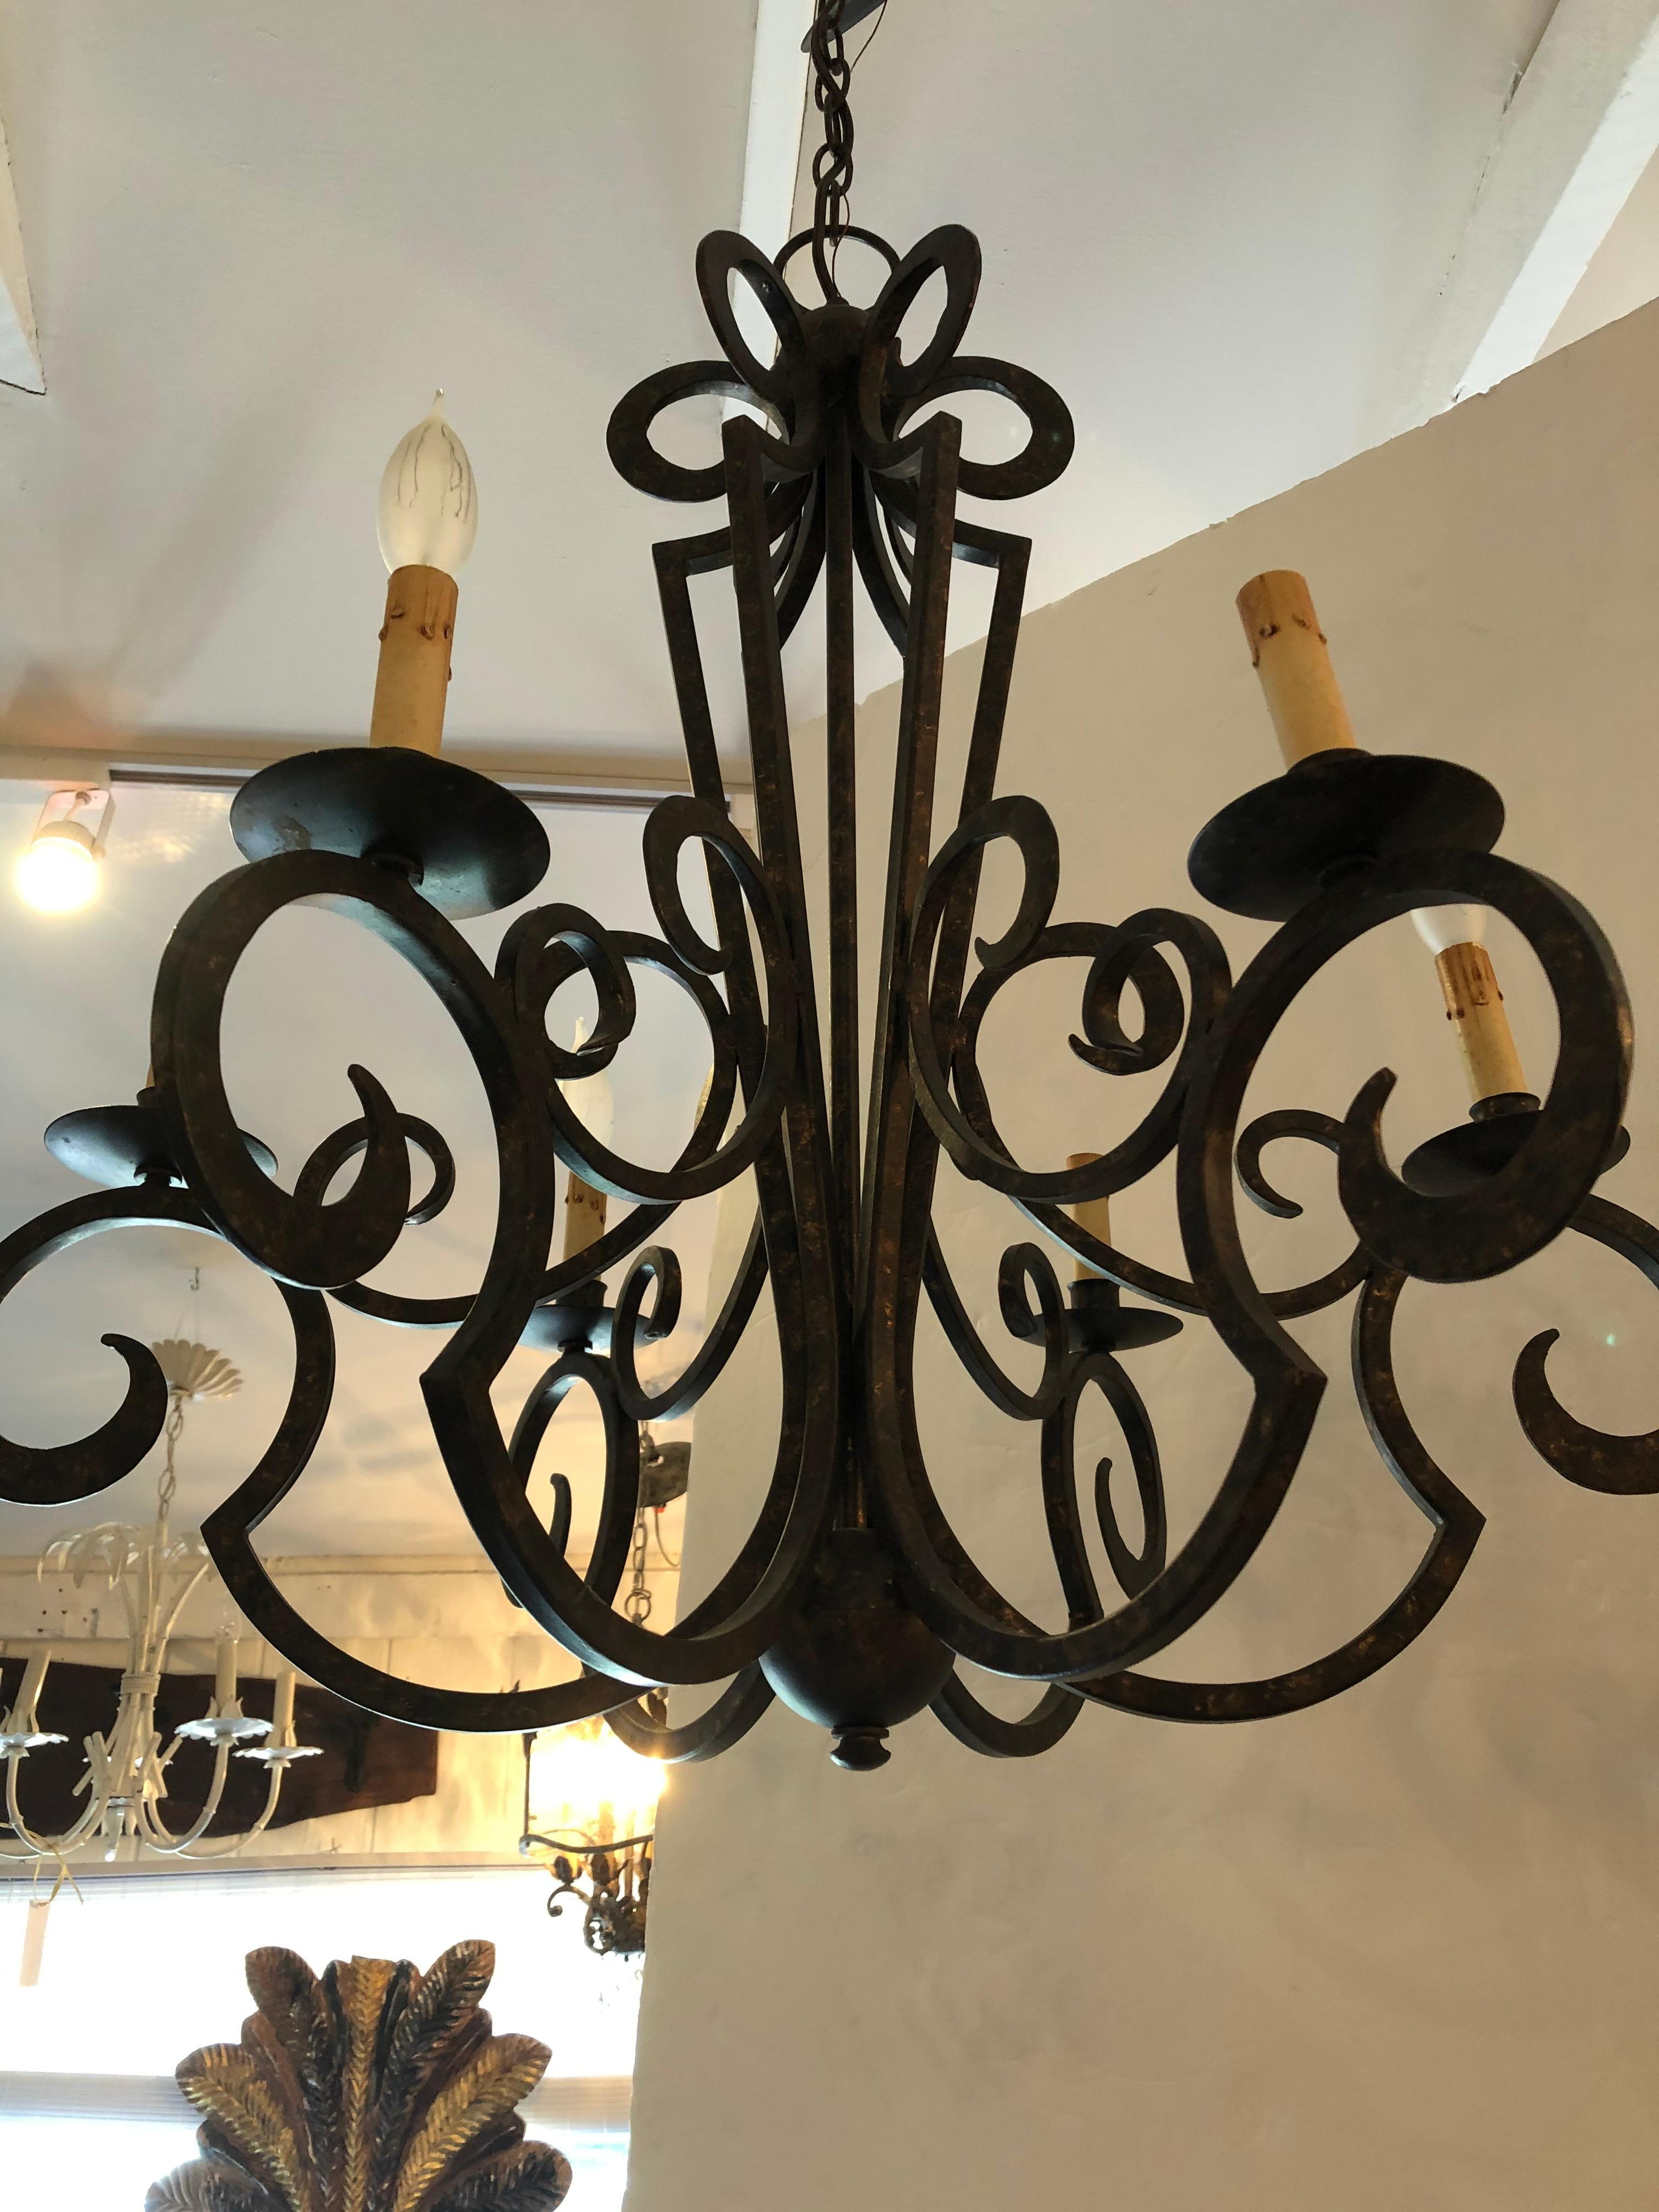 A great looking stylish wrought iron curlicue contemporary chandelier having a fabulous dark bronze finish with traces of gilding underneath. Nice size with 6 arms and matching ceiling cap as well as 16